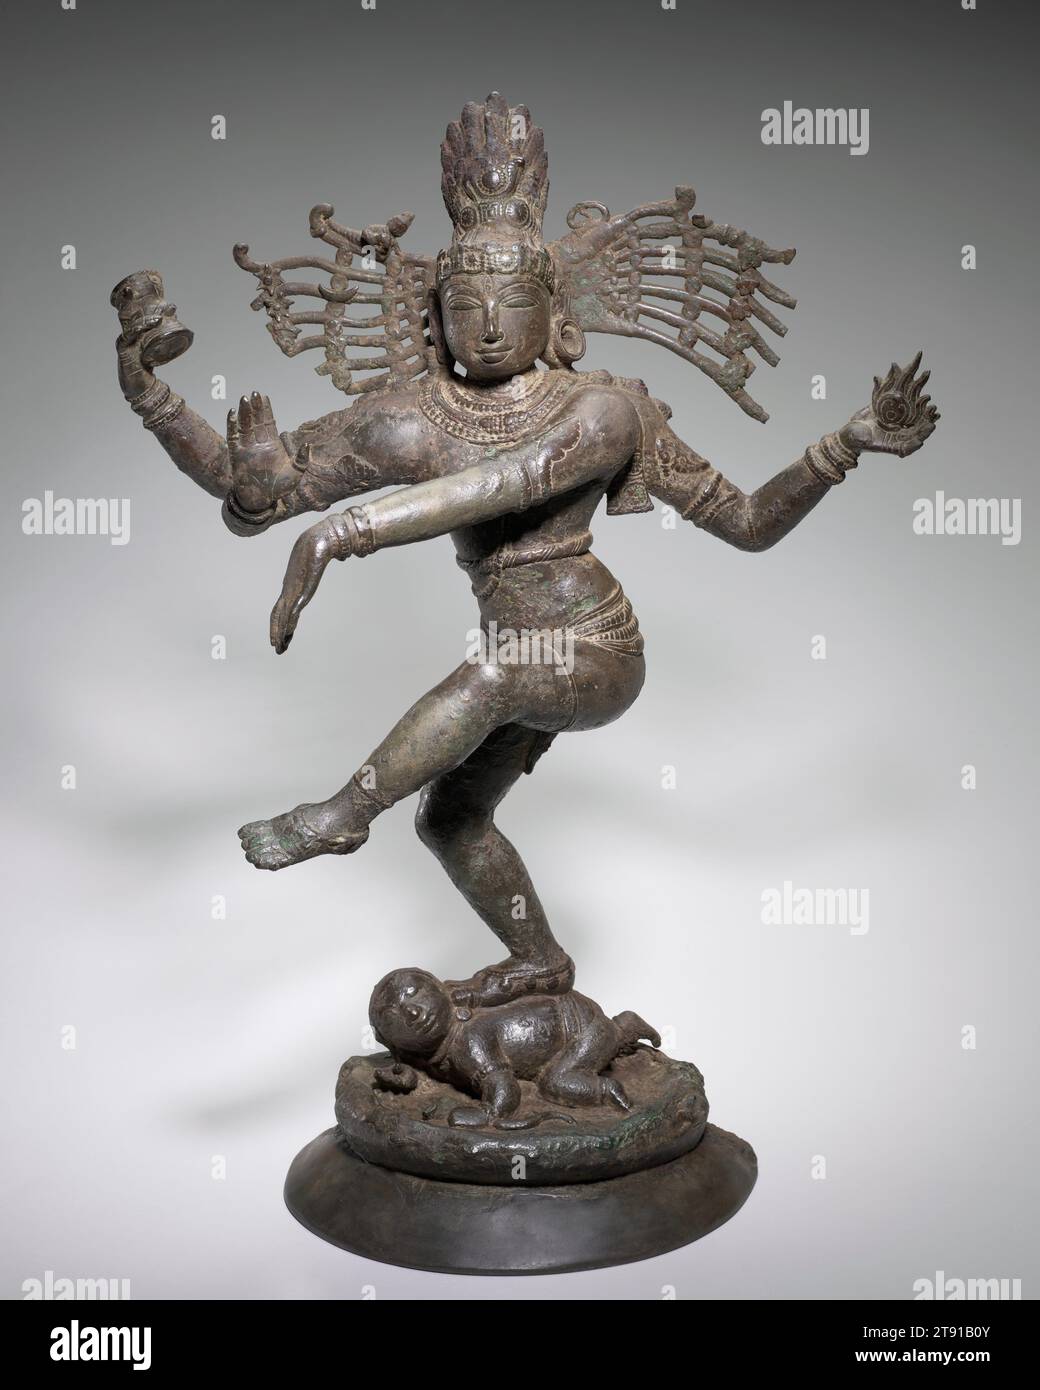 Shiva Nataraja (Lord of the Dance), c. 1100, 28 in. (71.12 cm), Bronze, India, 11th or 12th century, The Hindu god Shiva appears in several incarnations. Here, Shiva appears as Nataraja, or Lord of the Dance. He raises his left foot in a graceful dance pose. In his upper right hand, Nataraja holds a drum, the sound of which manifests creation. The flame that he holds in his upper left hand symbolizes destruction. Together, they symbolize the creation and destruction of the cosmic universe. The posture of the icon’s lower left and right palms signifies protection. Stock Photo